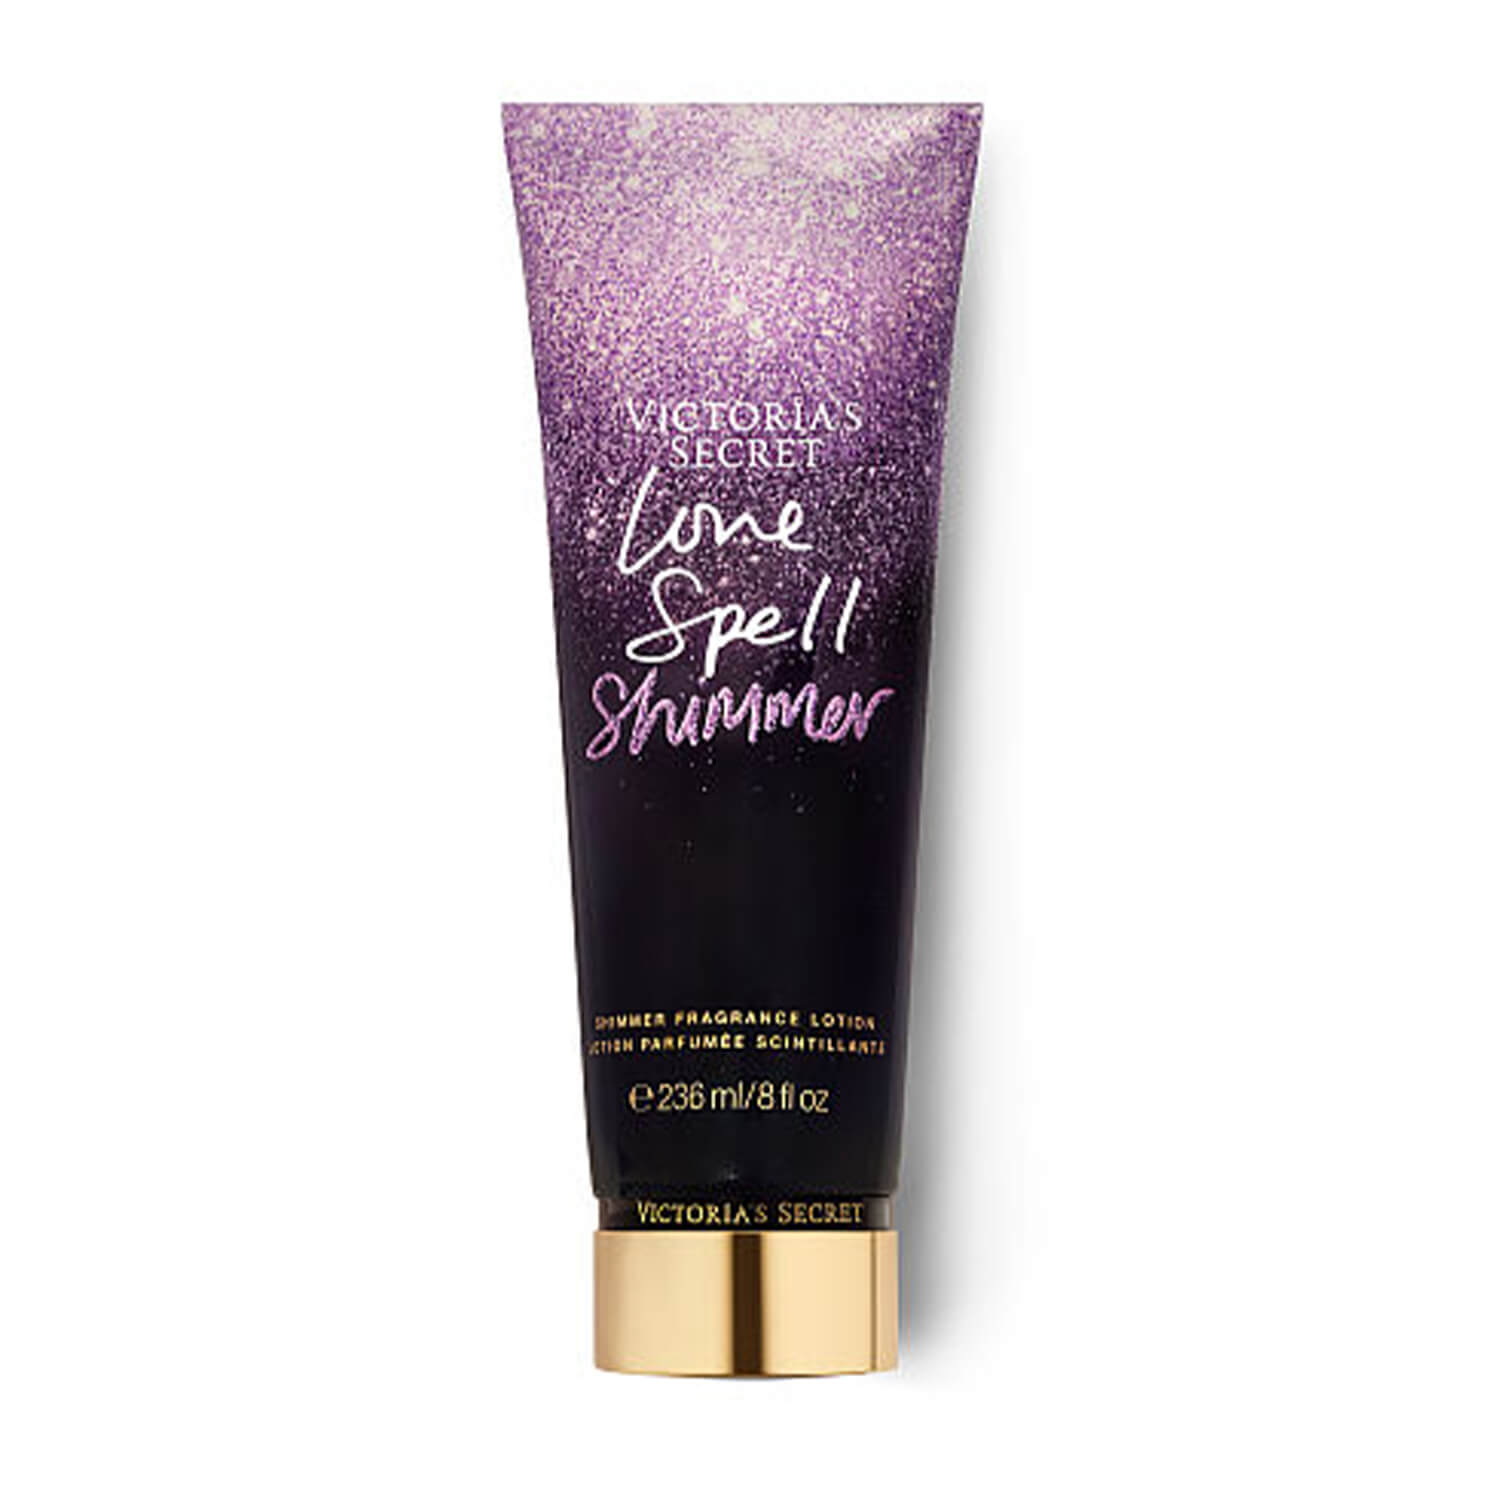 Shop Victoria's Secret body lotion in love spell shimmer fragrance available at Heygirl.pk for delivery in Pakistan